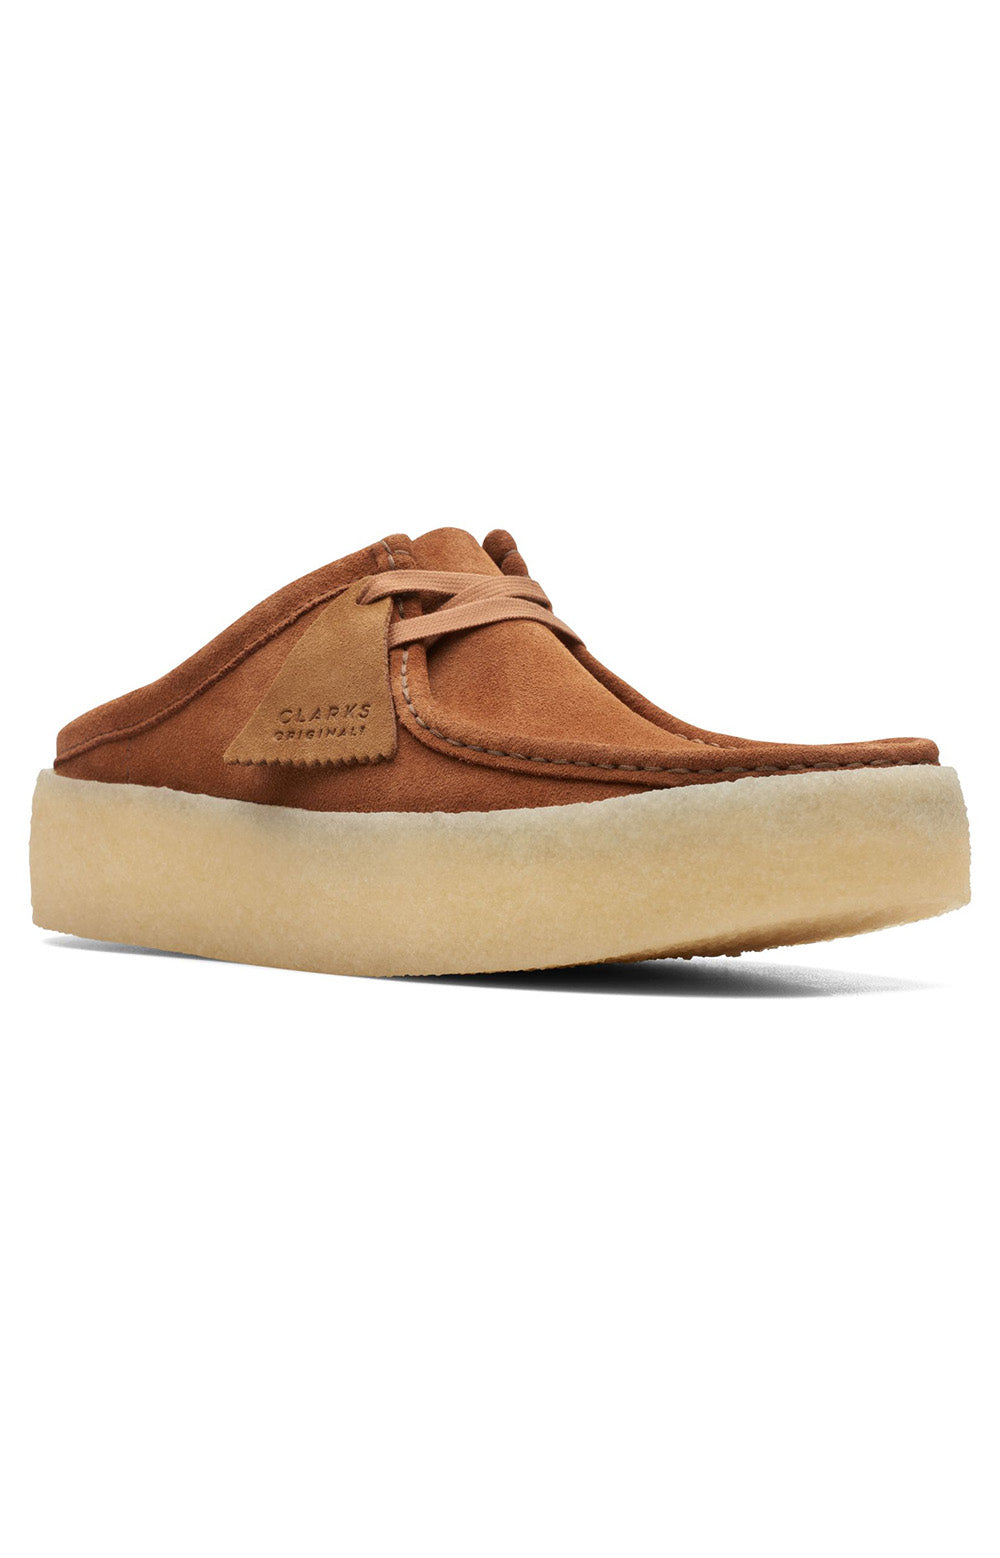 Clarks Originals Wallabee Cup Low Men's Tan Suede 26167287 shoe from the side angle